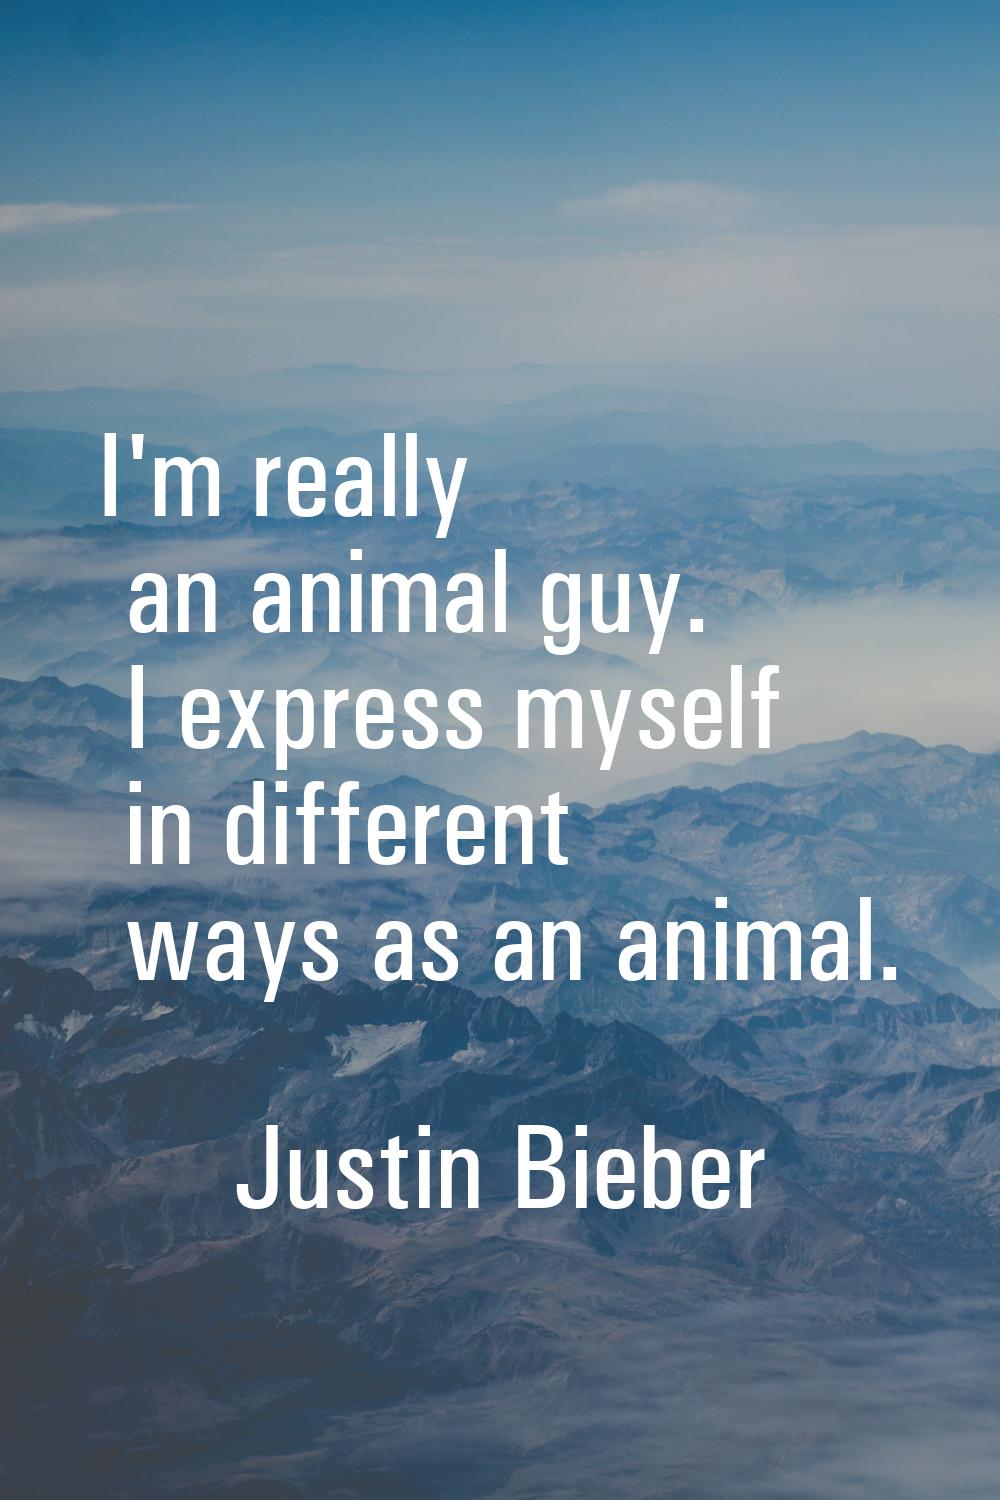 I'm really an animal guy. I express myself in different ways as an animal.